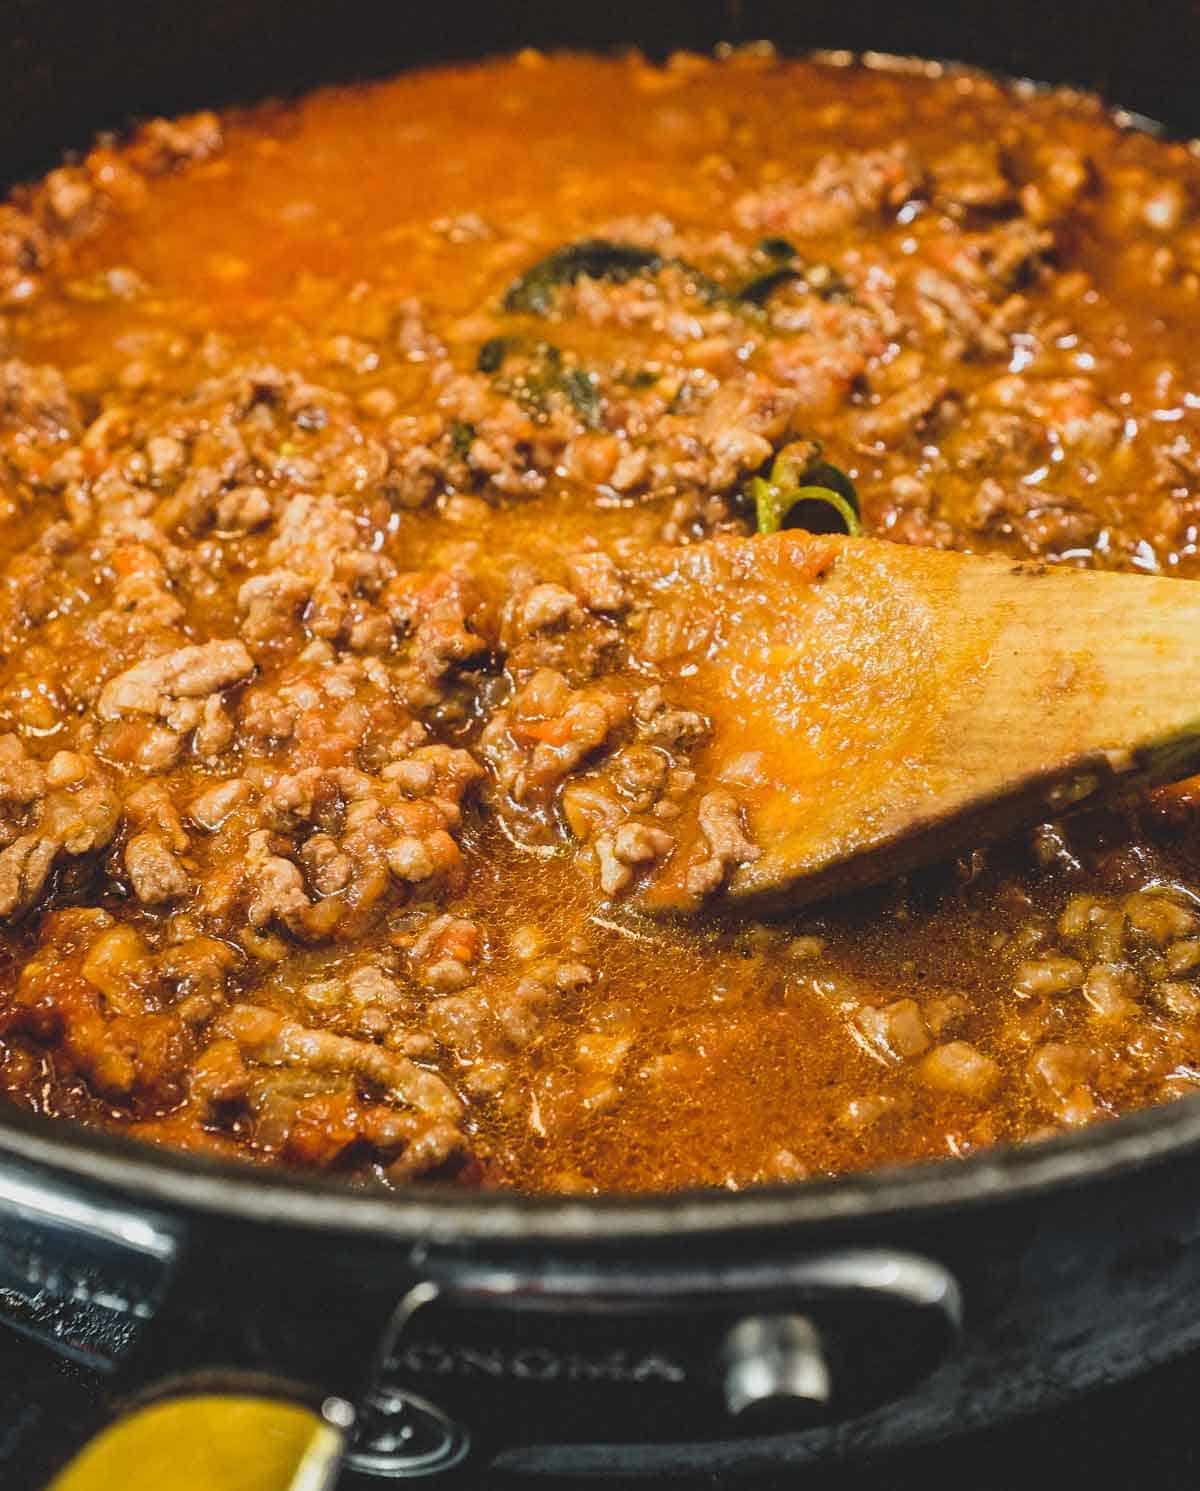 Stirring the meat sauce in a pan for the Anelletti al forno baked pasta.